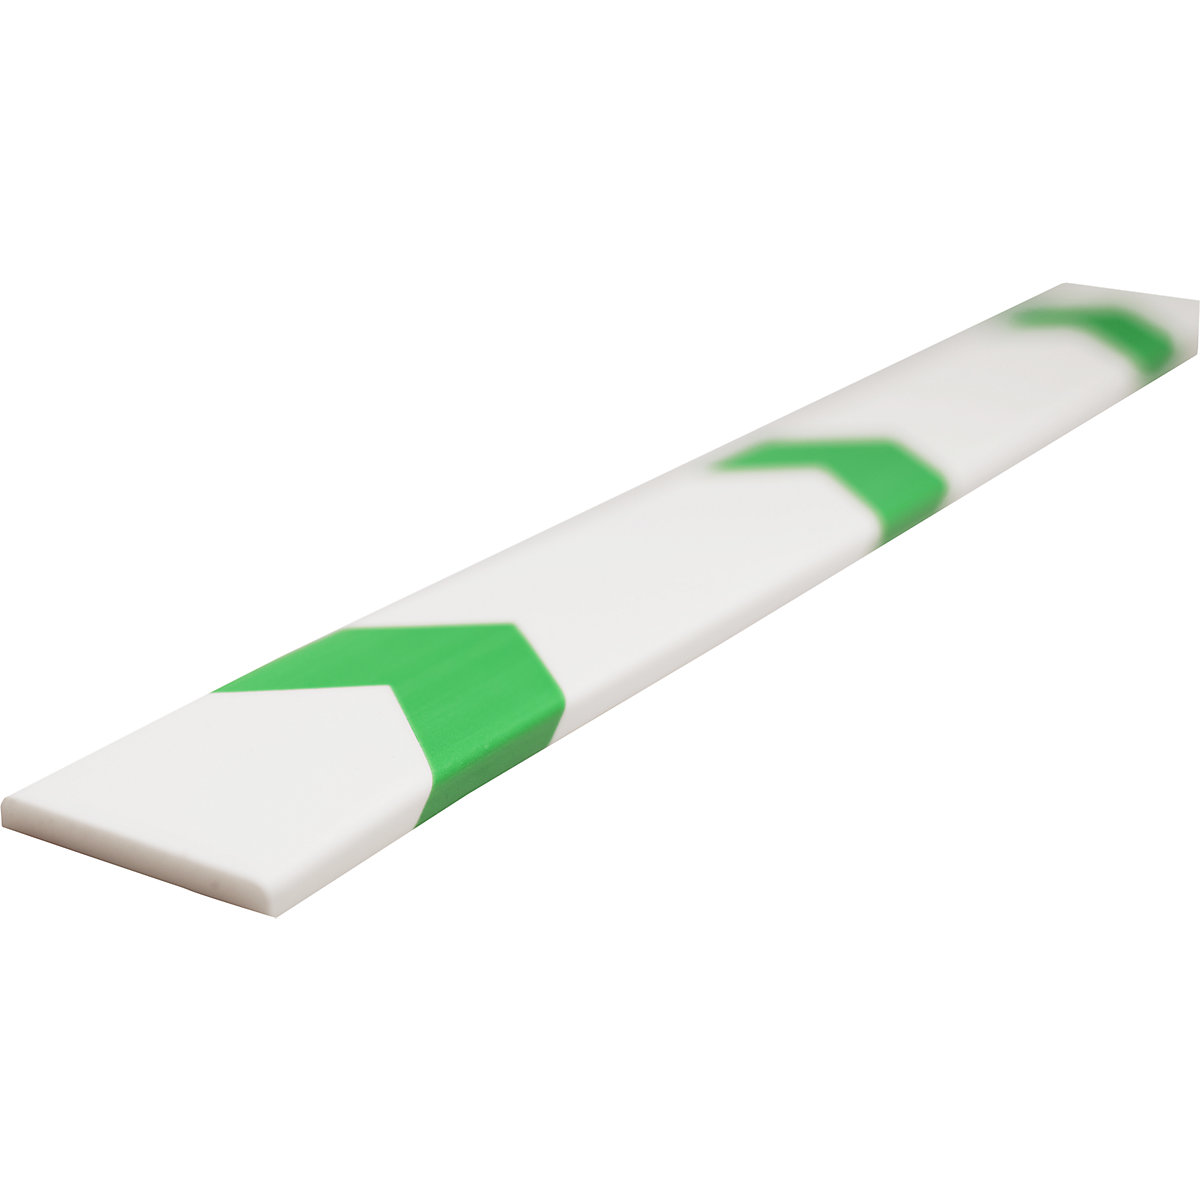 ONEWAY Knuffi® guidance system – SHG, 1 m length, reusable, green / white-2